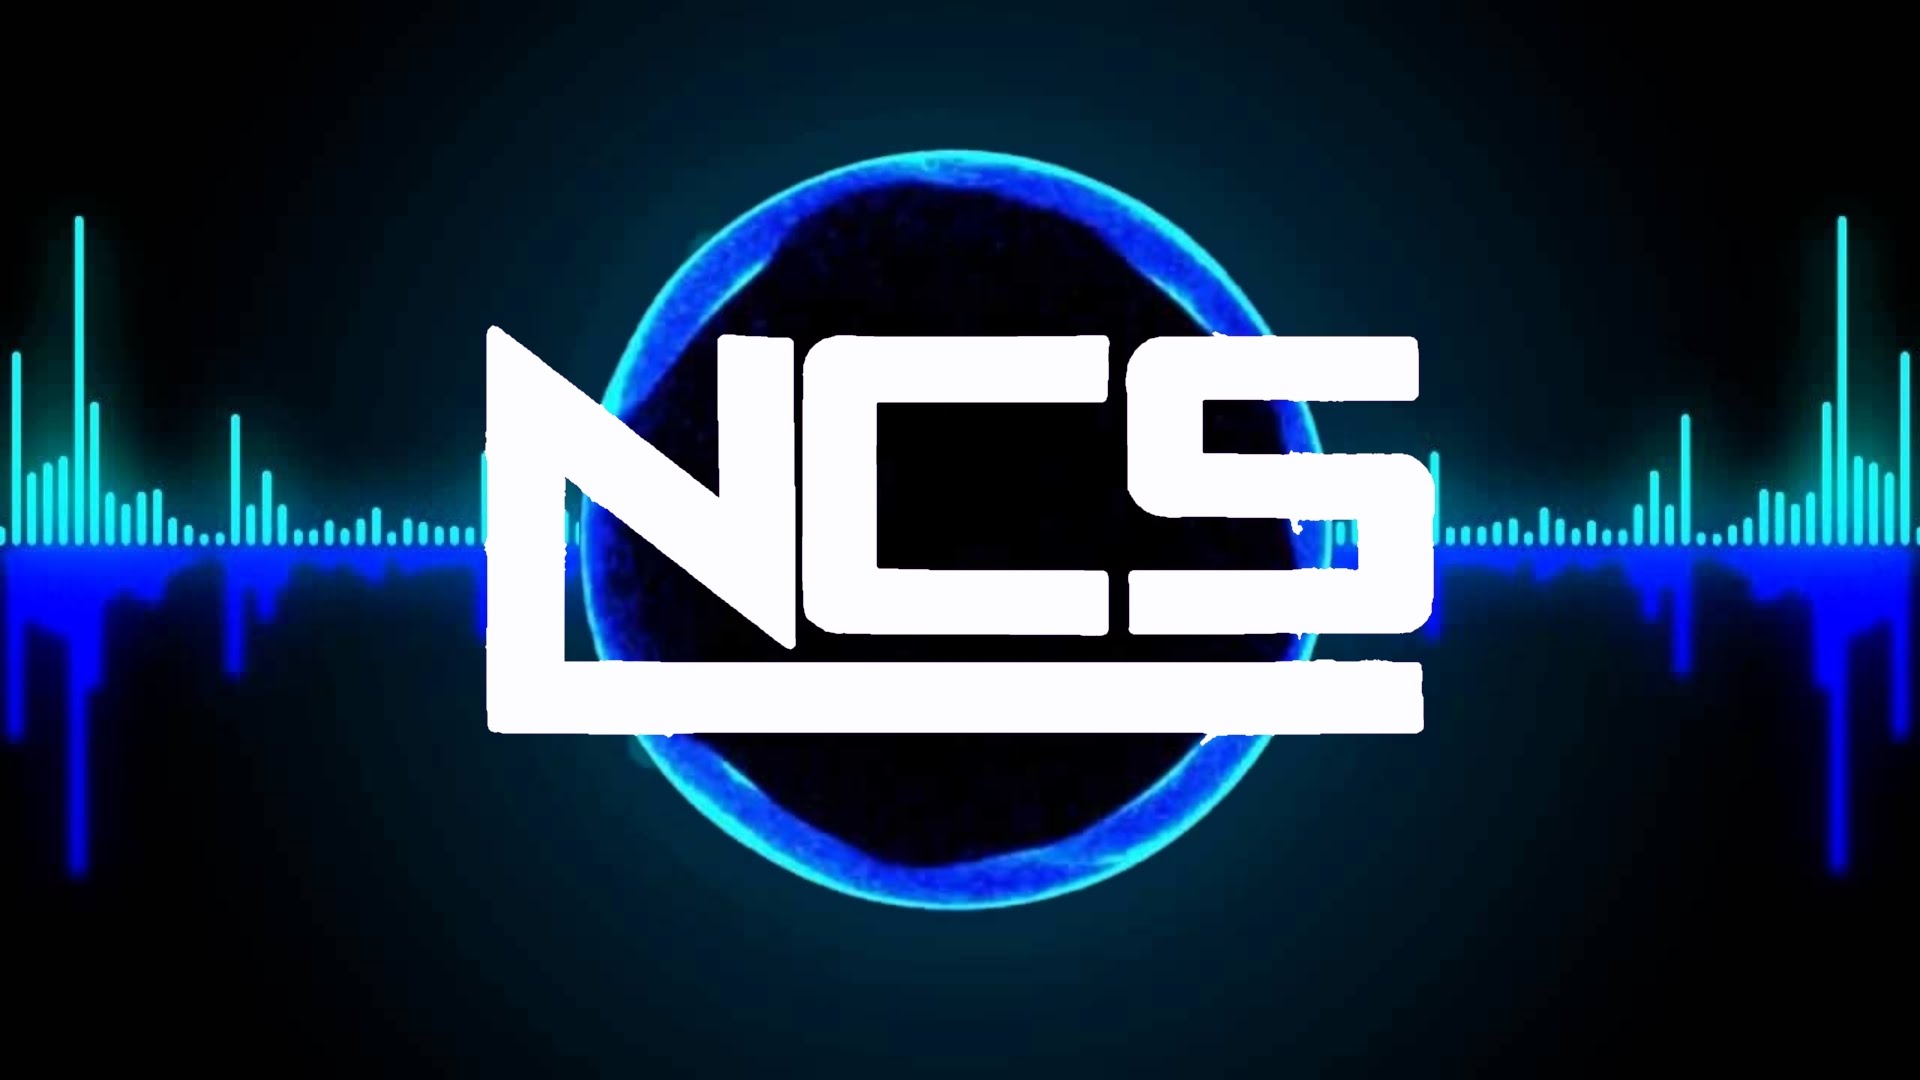 Best NCS Gaming Video Music NO COPYRIGHT - YouTube